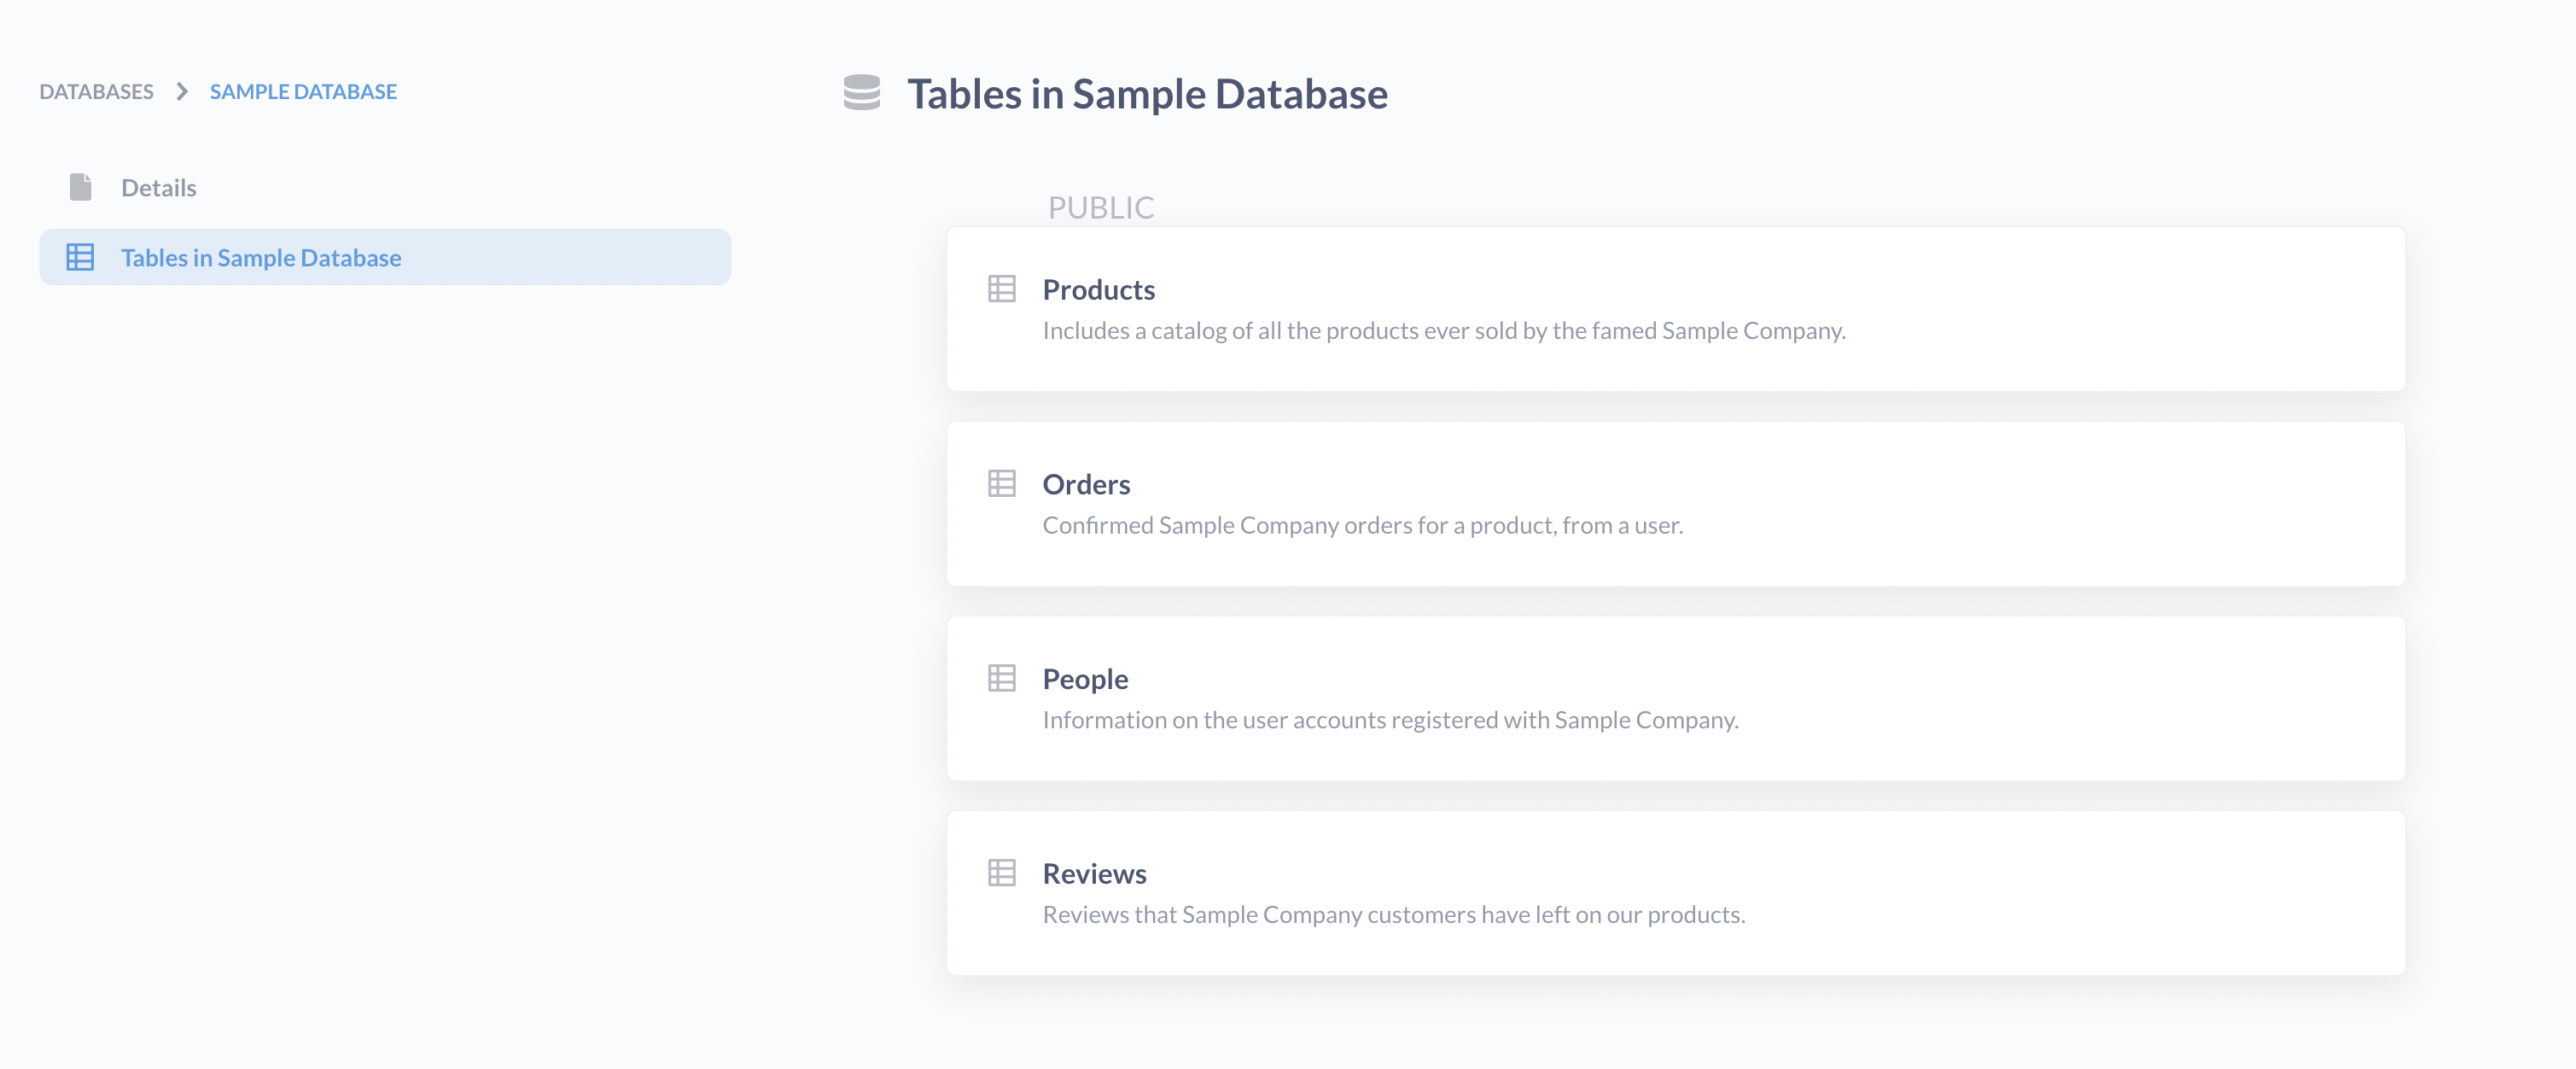 Browse data to explore databases, tables, and fields.